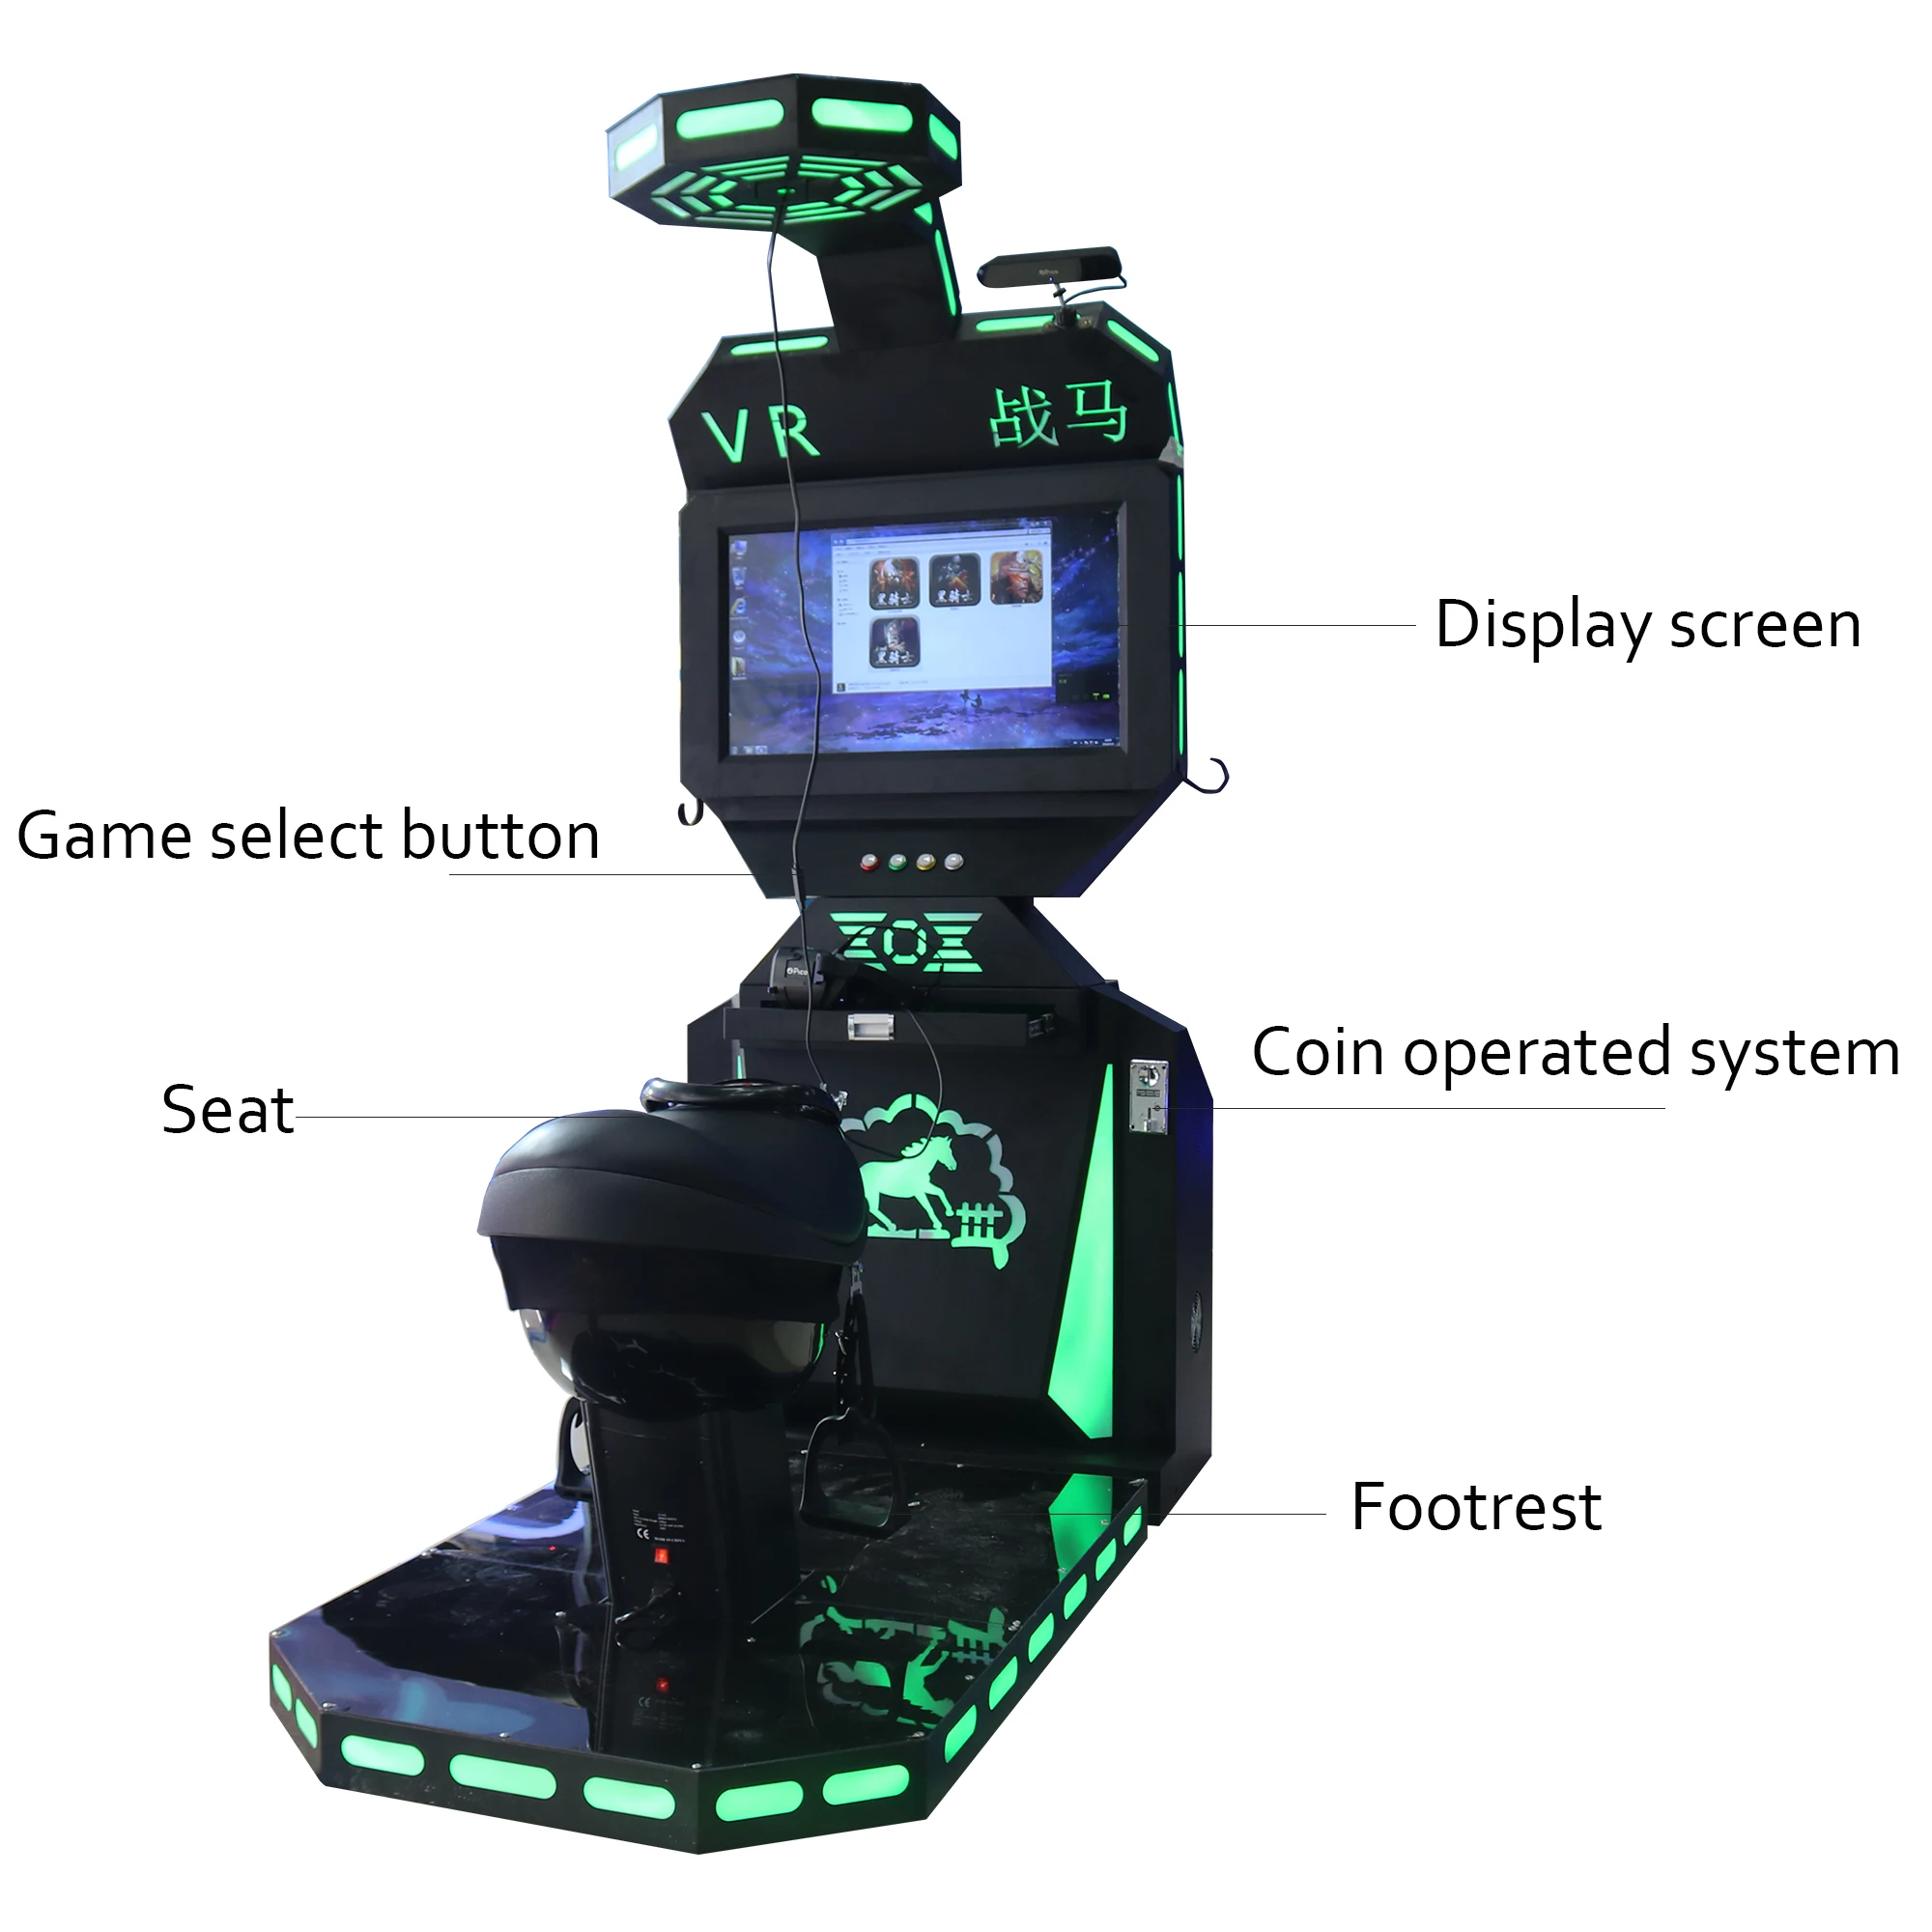 9d vr horse arcade simulator riding games for sale